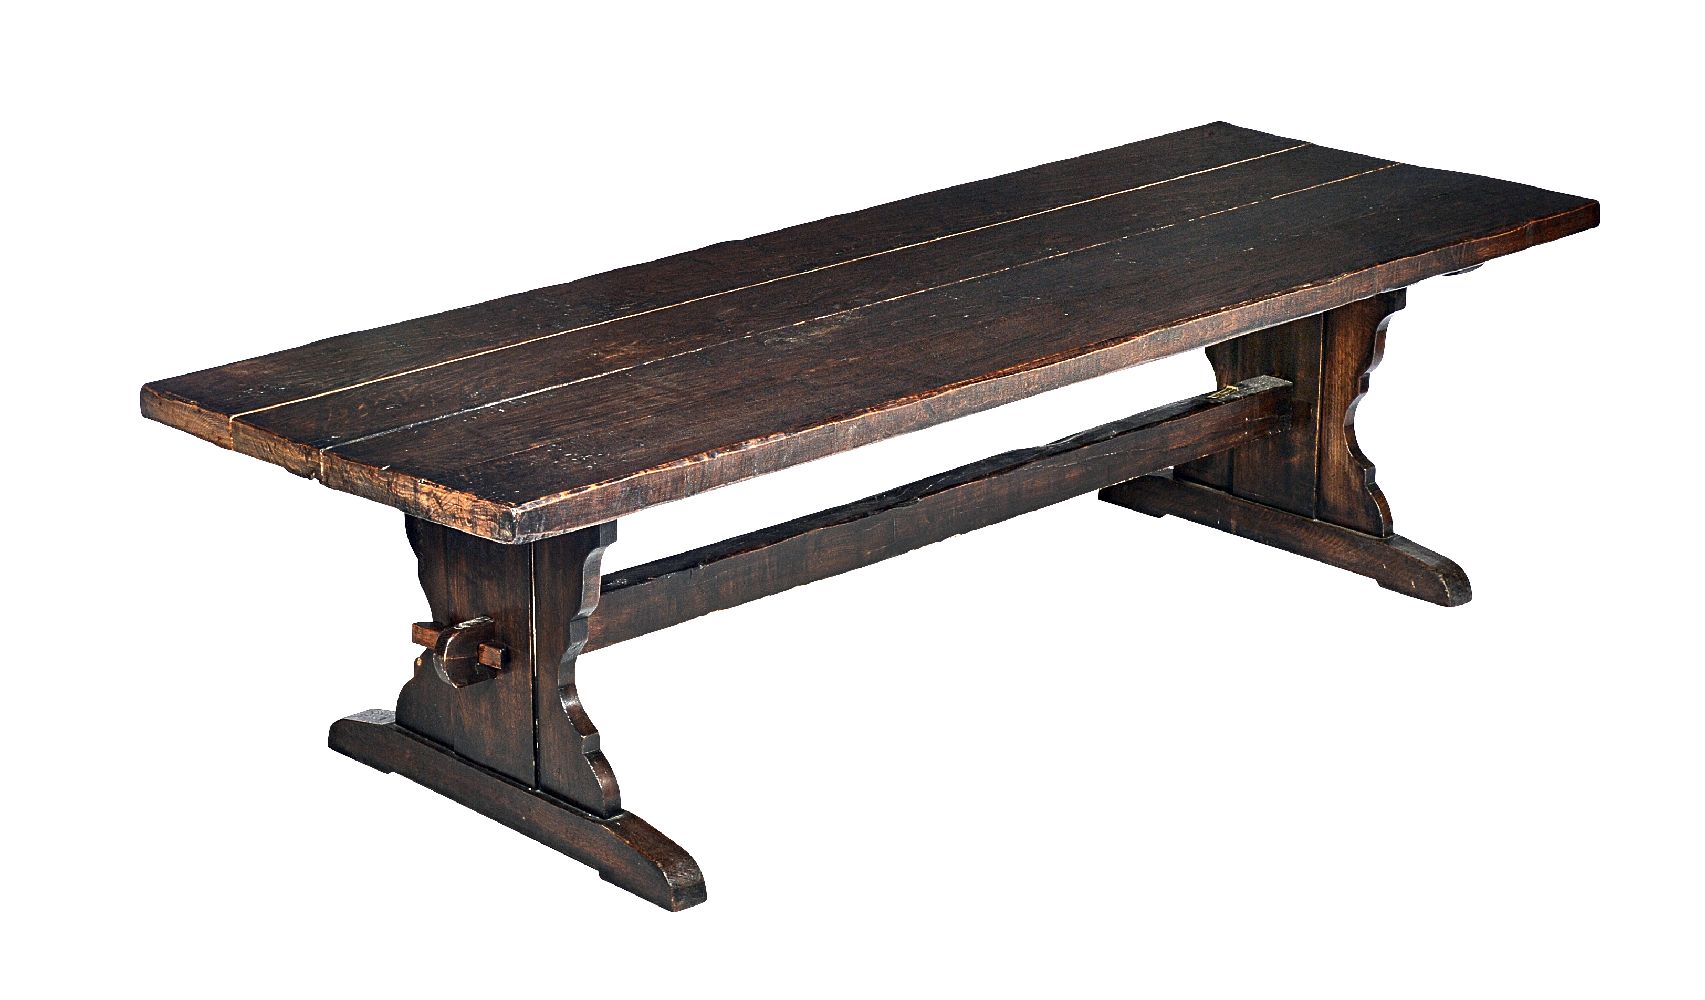 An oak refectory table in late 17th century style